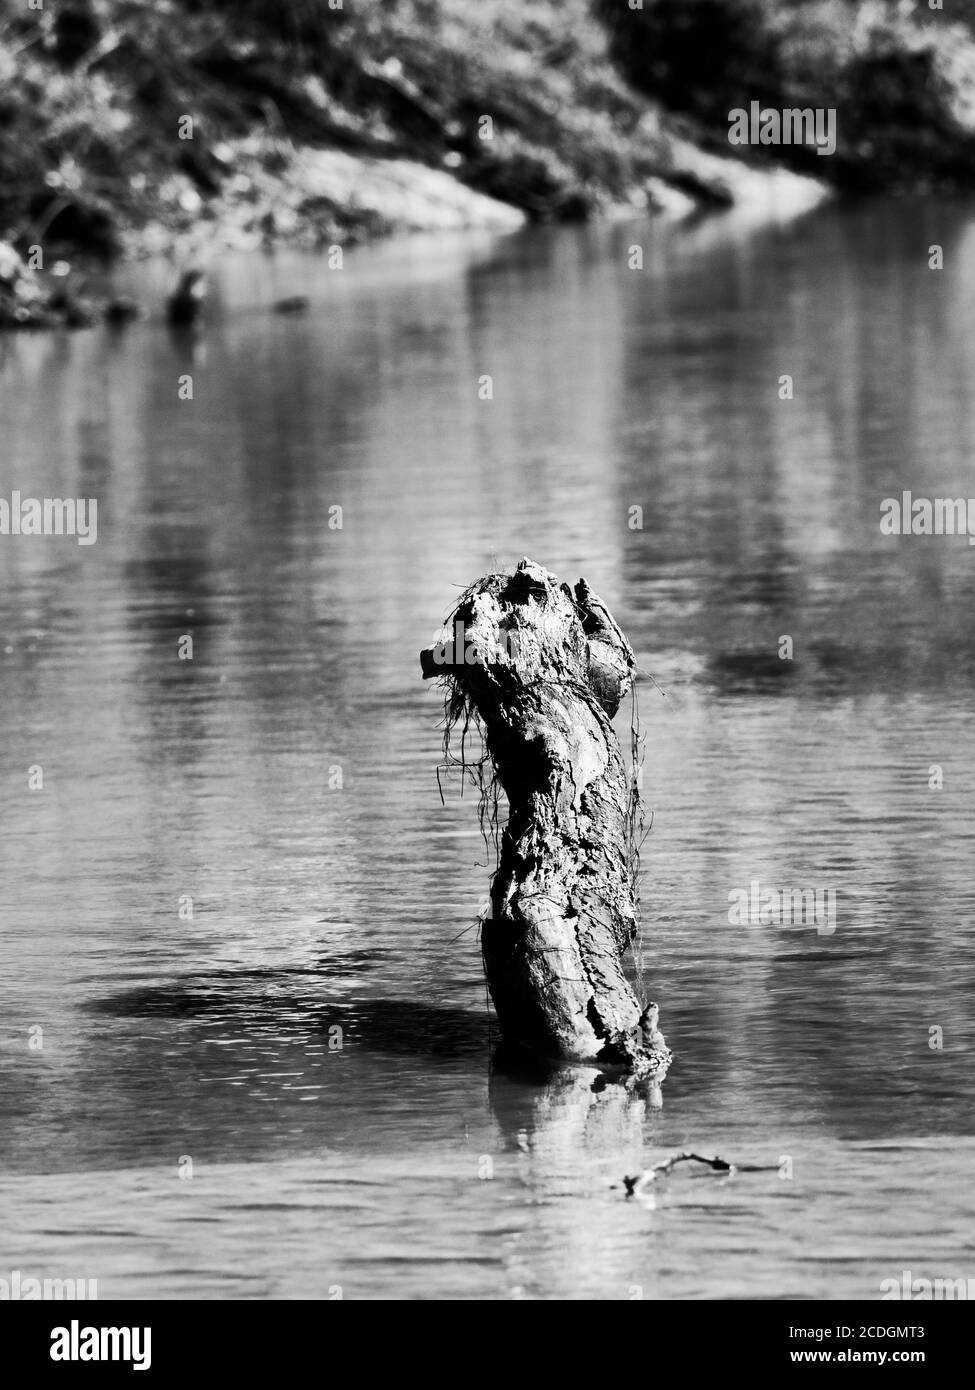 The Woodlands TX USA - 01-20-2020 - Log in the Fluss in B&W Stockfoto